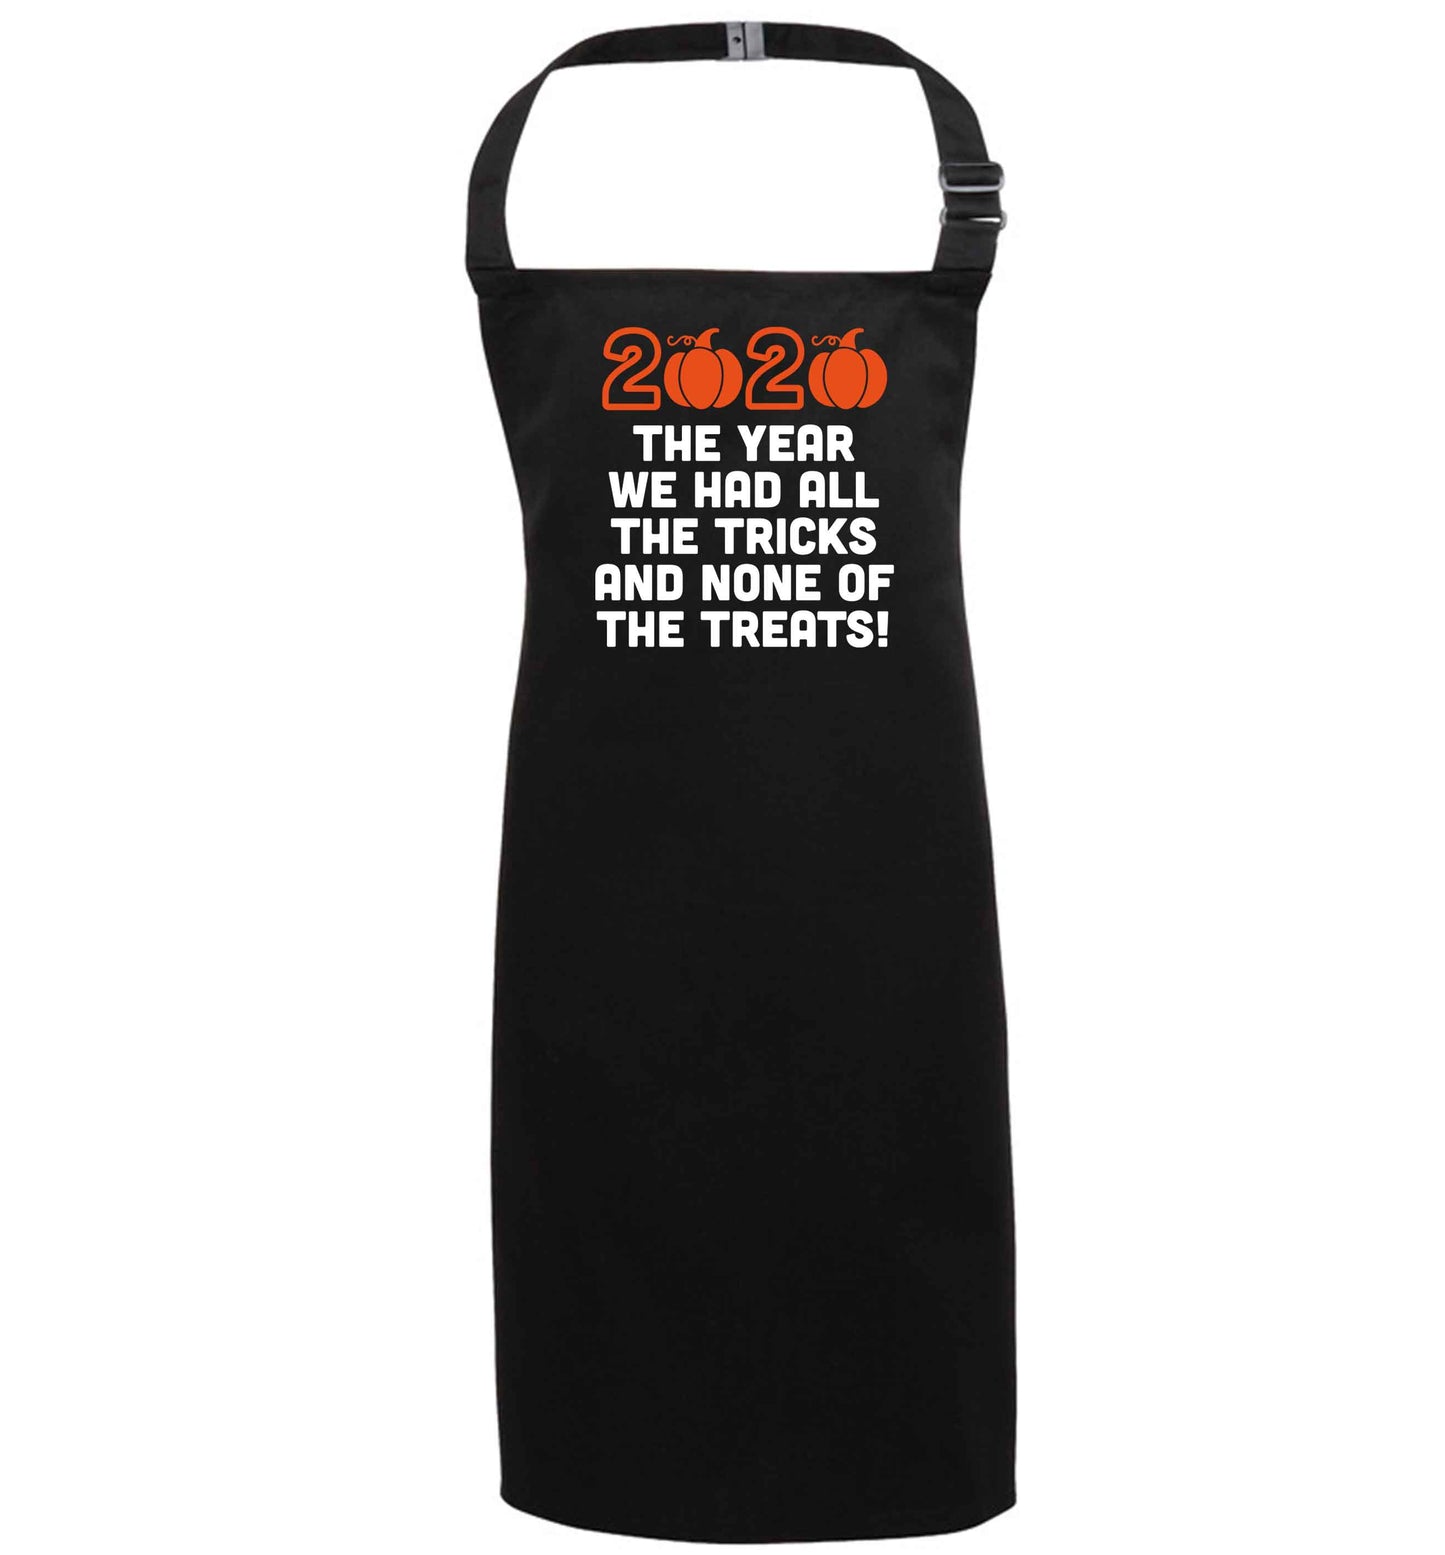 2020 The year we had all of the tricks and none of the treats black apron 7-10 years